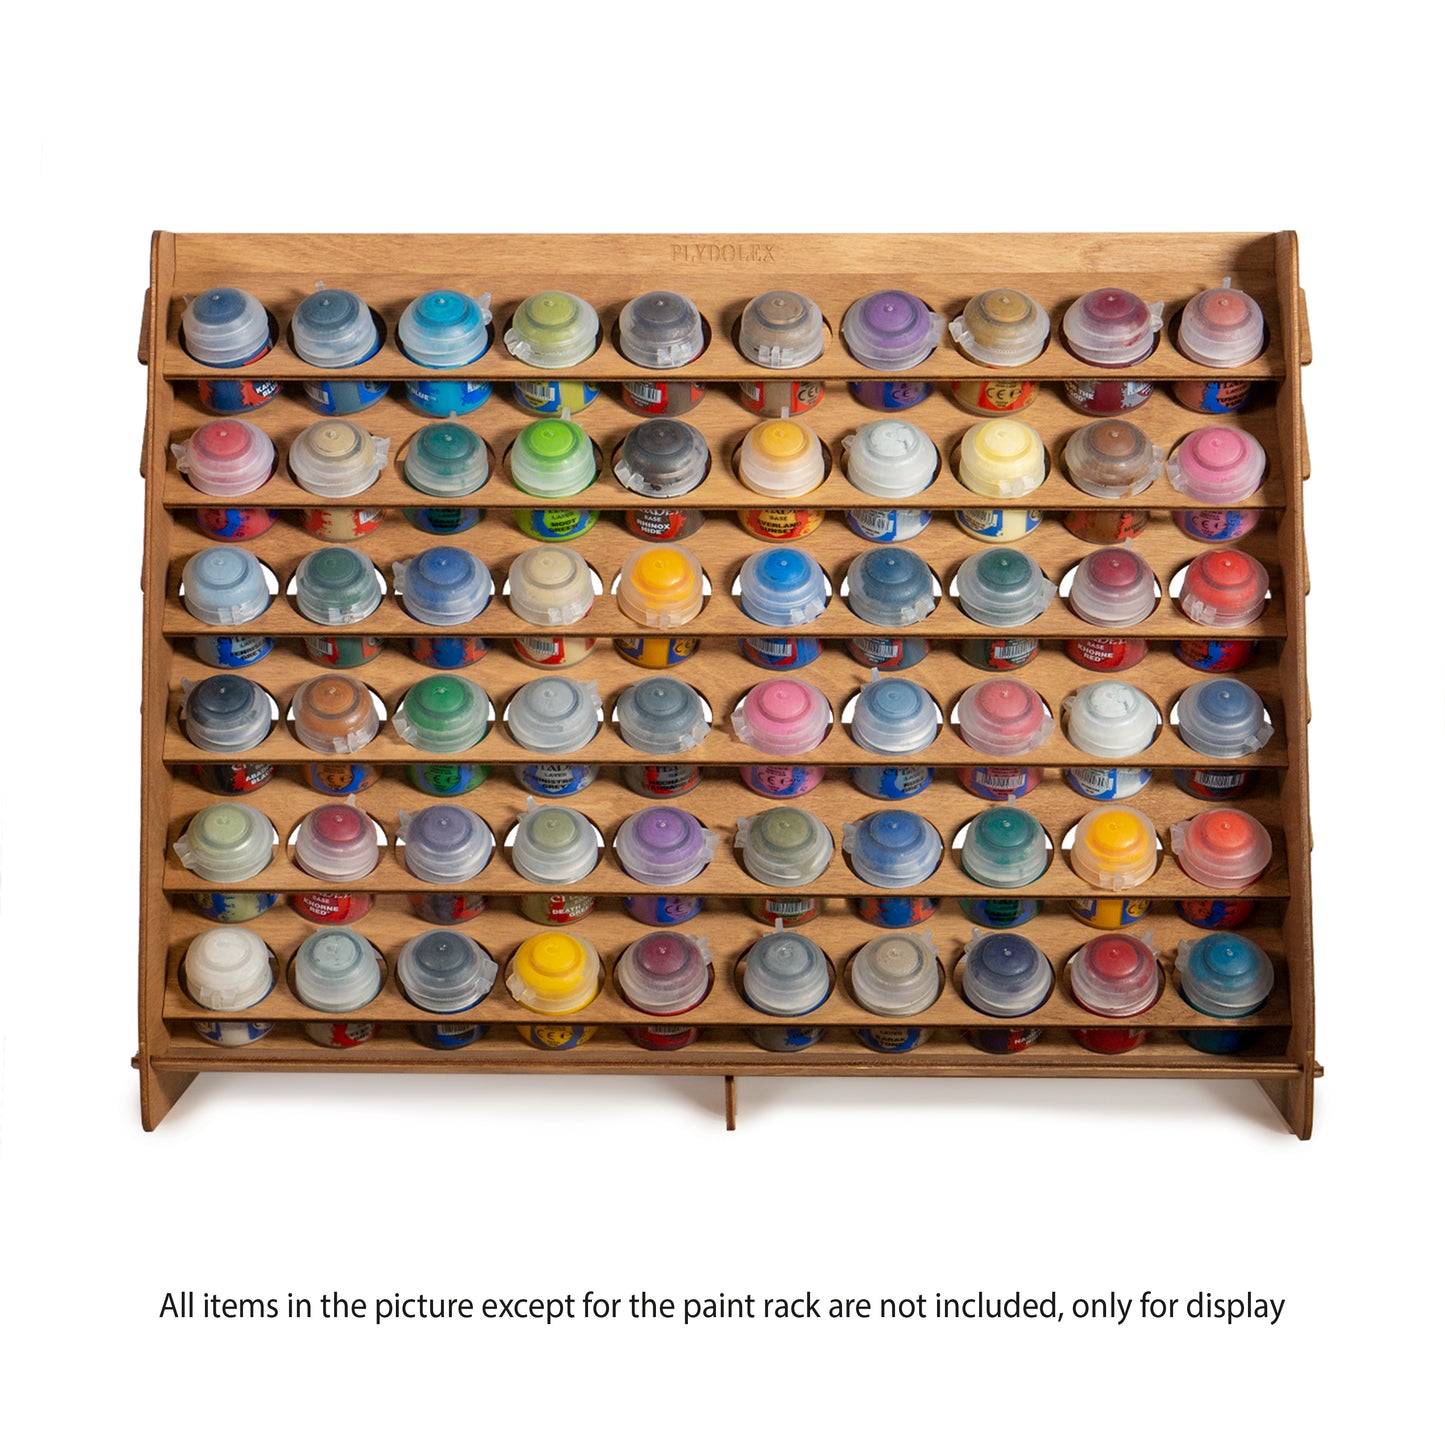 Plydolex Paint Rack Organizer with 65 Holes of 2 Sizes for Miniature Paint Set - Wall-Mounted Wooden Craft Paint Storage Rack - Craft Paint Holder